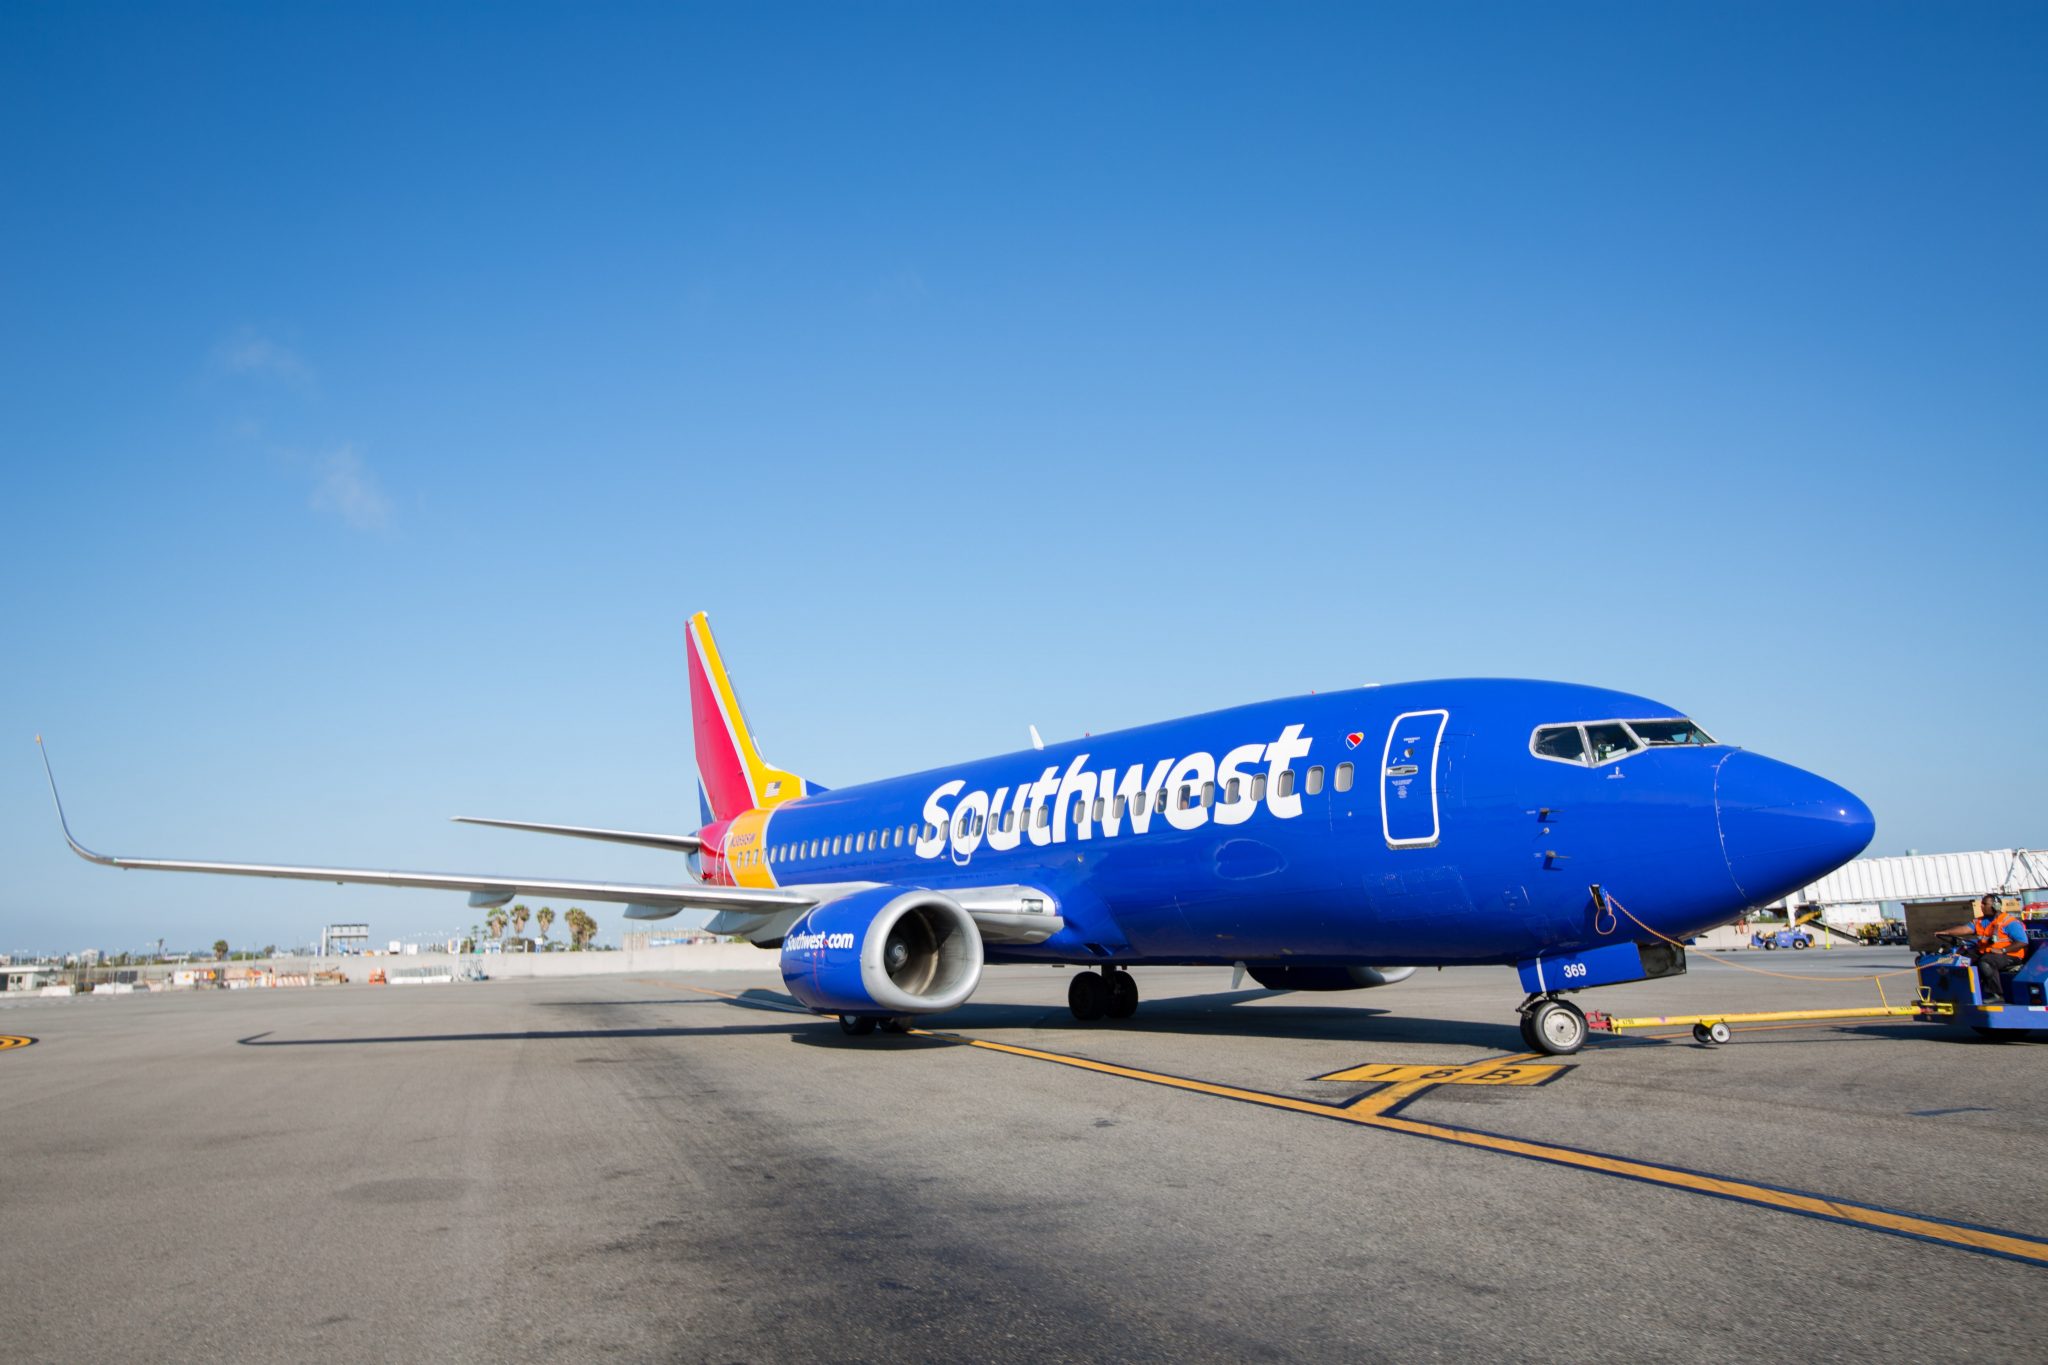 Southwest Pilots Union Says Allegations of Lavatory Live Streaming Voyeurism Are "Completely False"